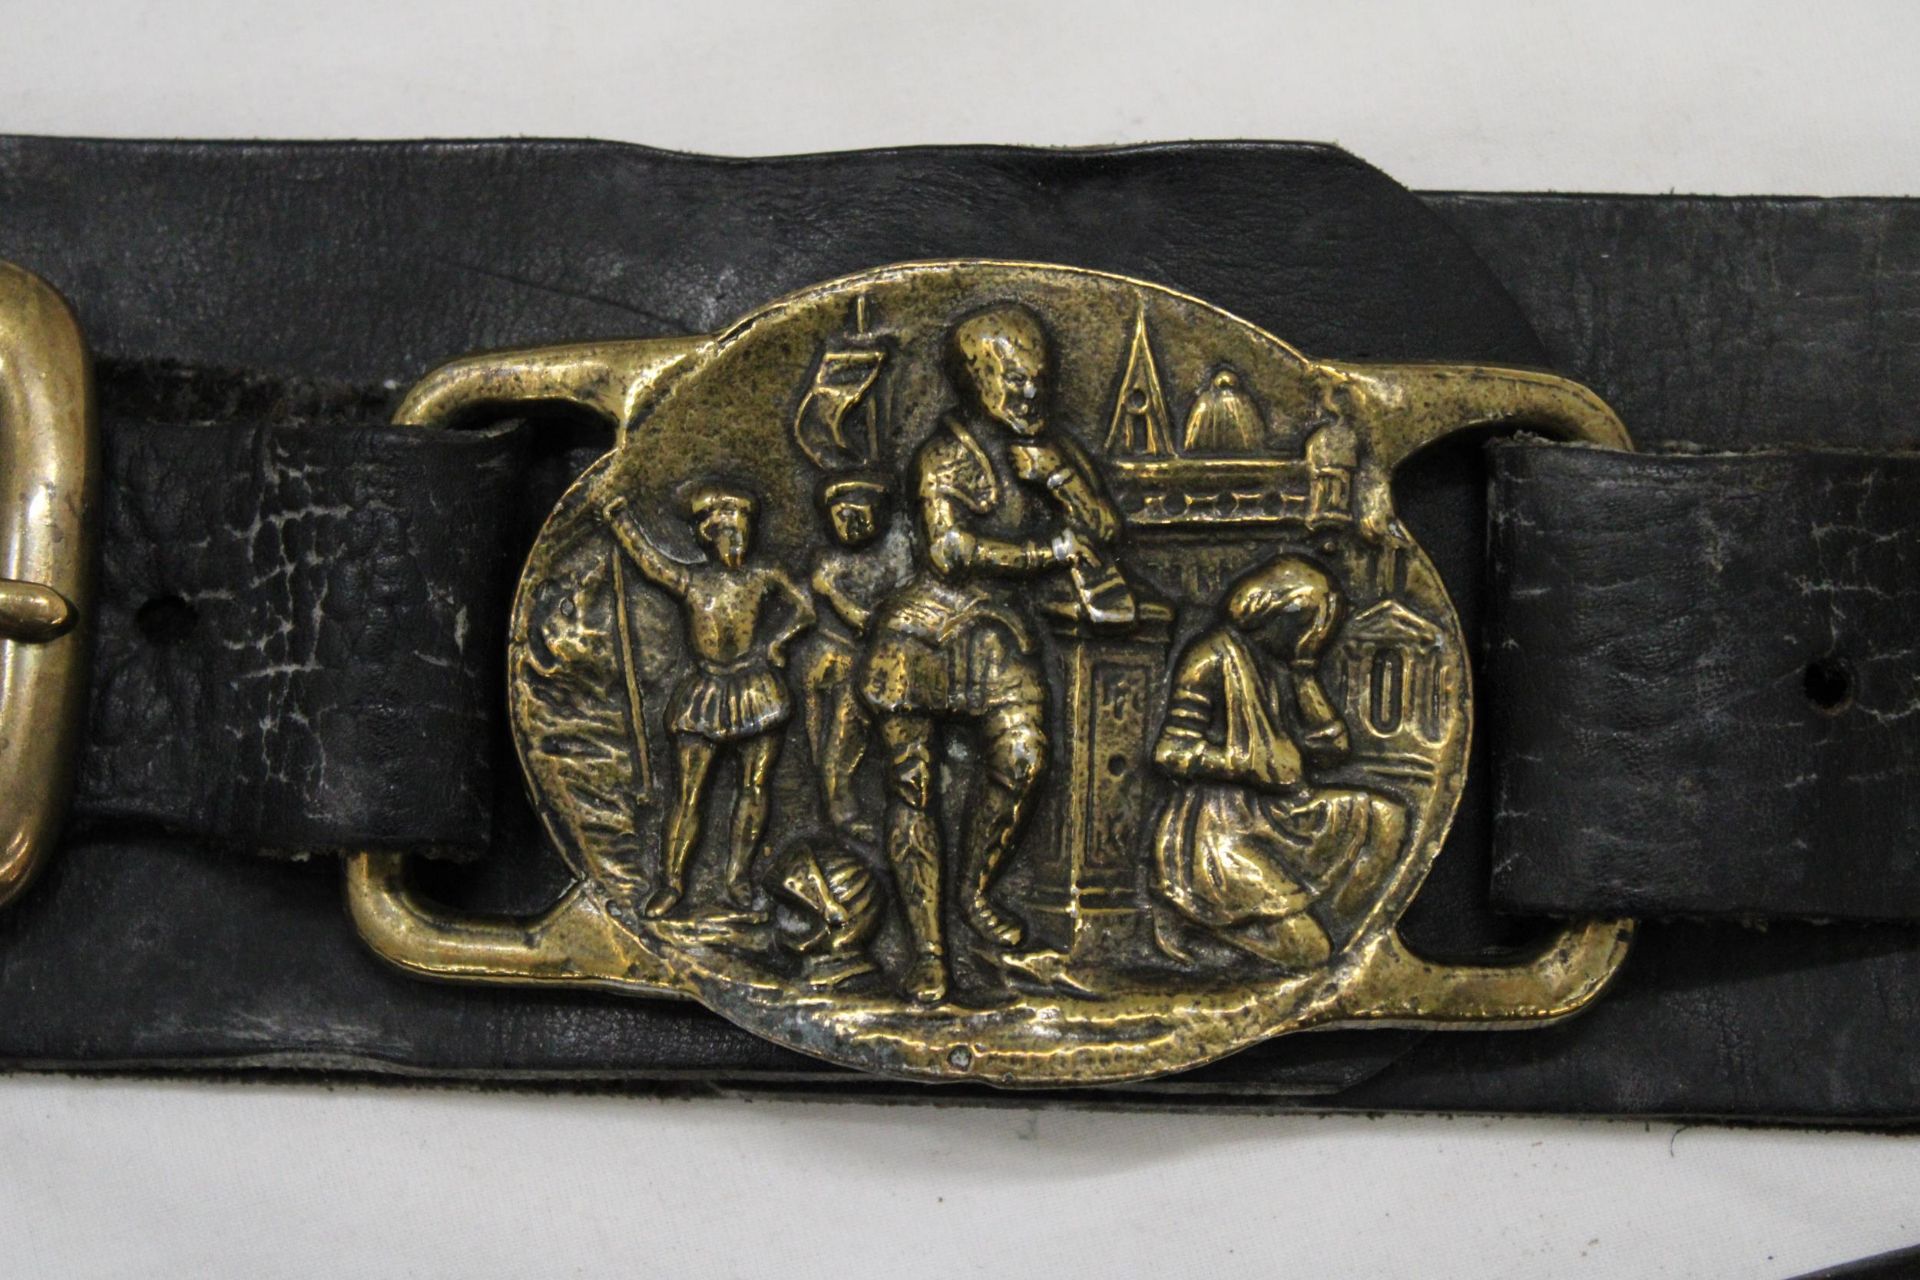 TWO HORSE BRASSES ON LEATHER STRAPS - Image 3 of 6